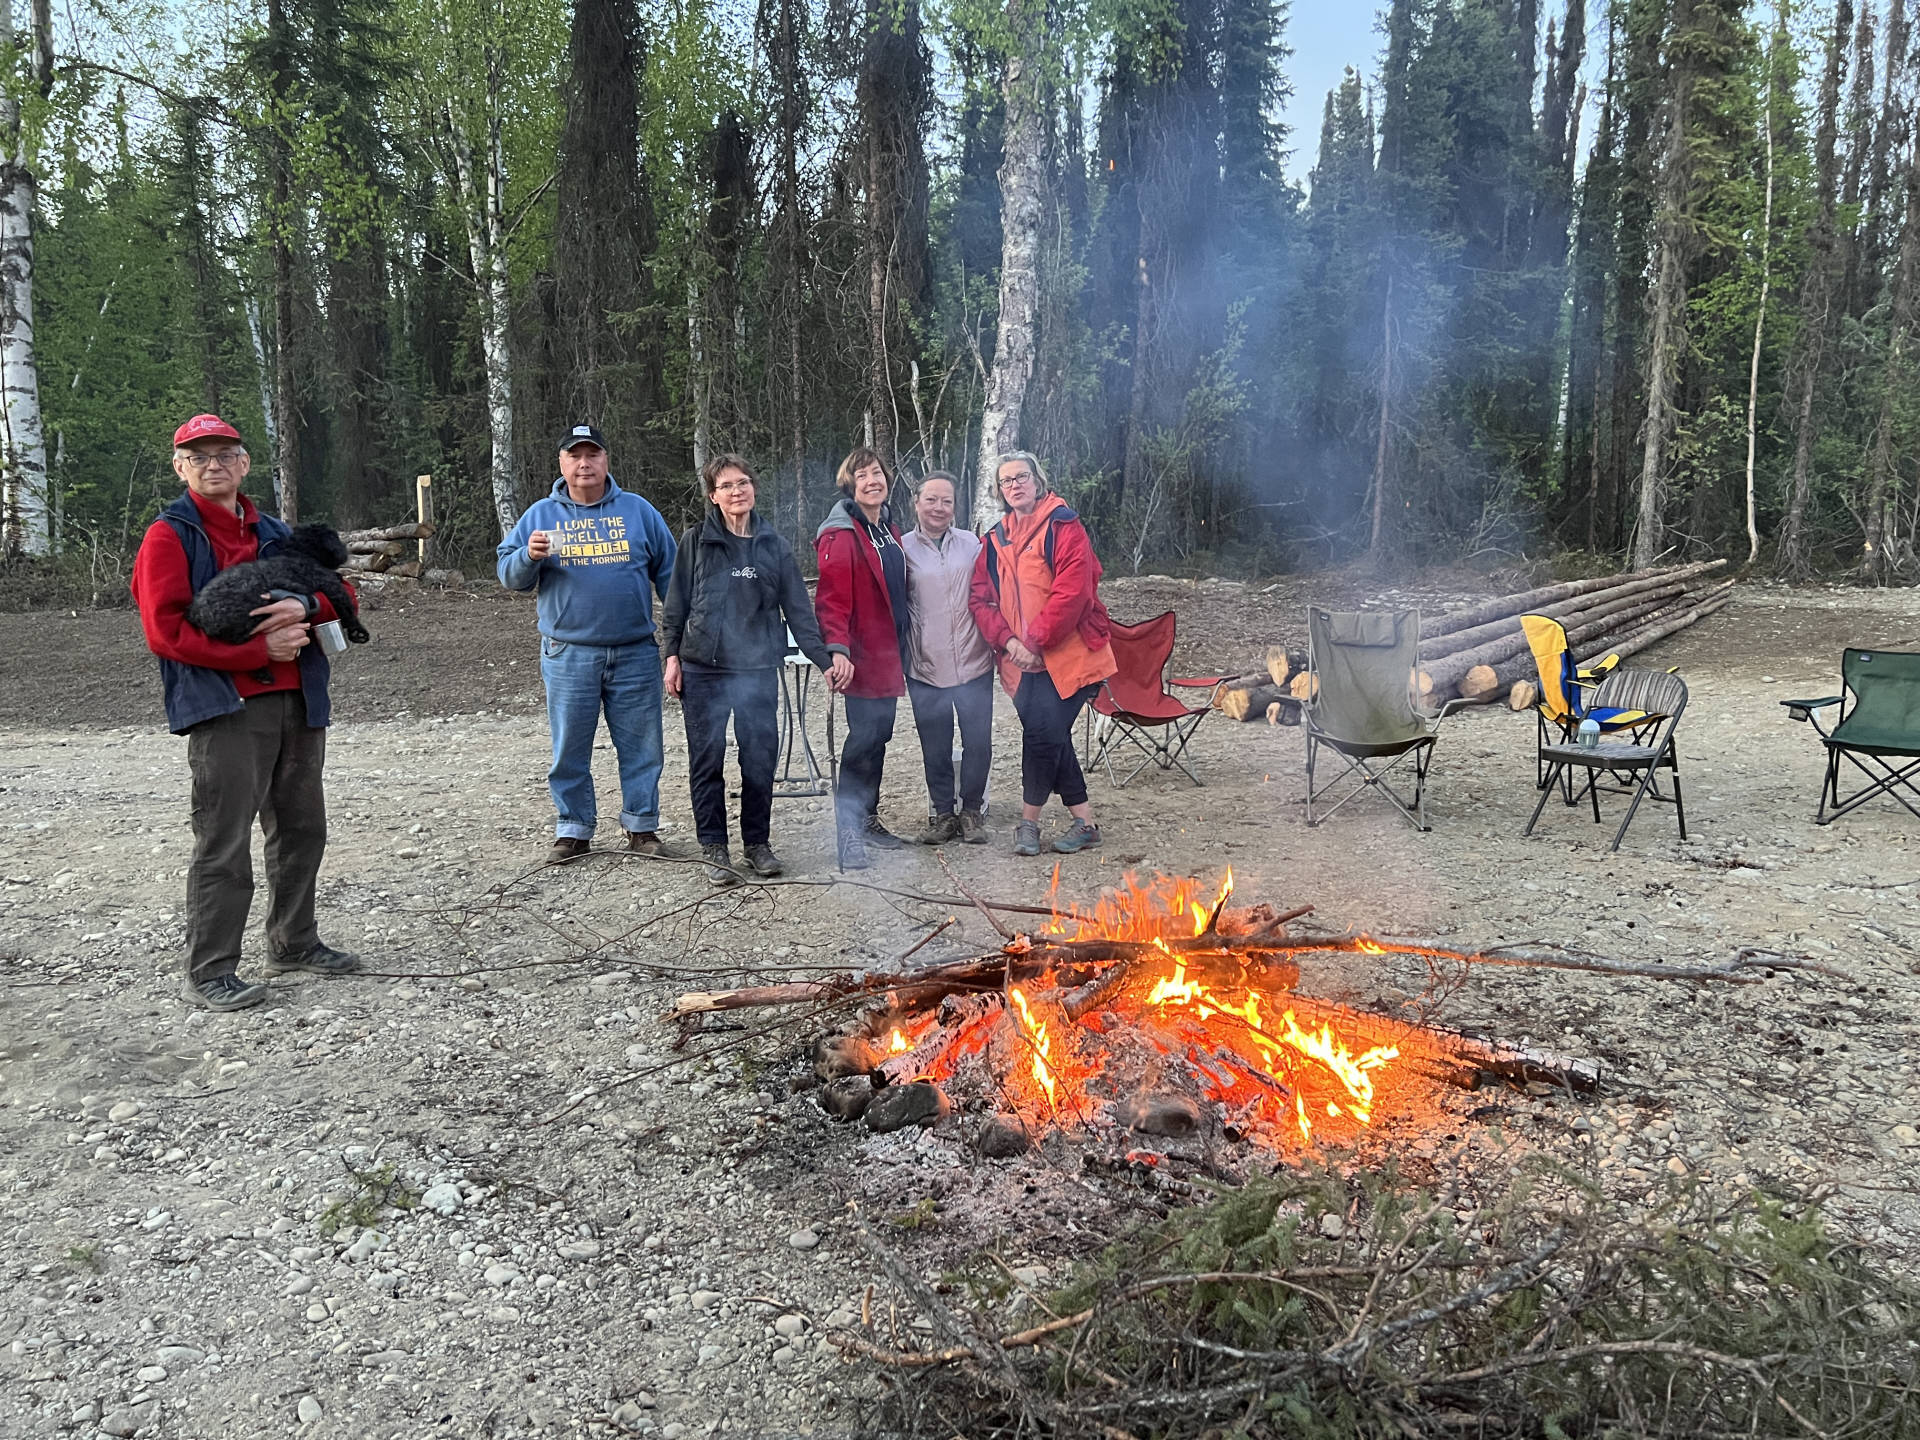 Picnic for 12 people with campfire. Unlimited amount of firewood is free to use! For picnics, gatherings and weddings of any size, you are required to bring your own tents, tables and chairs.